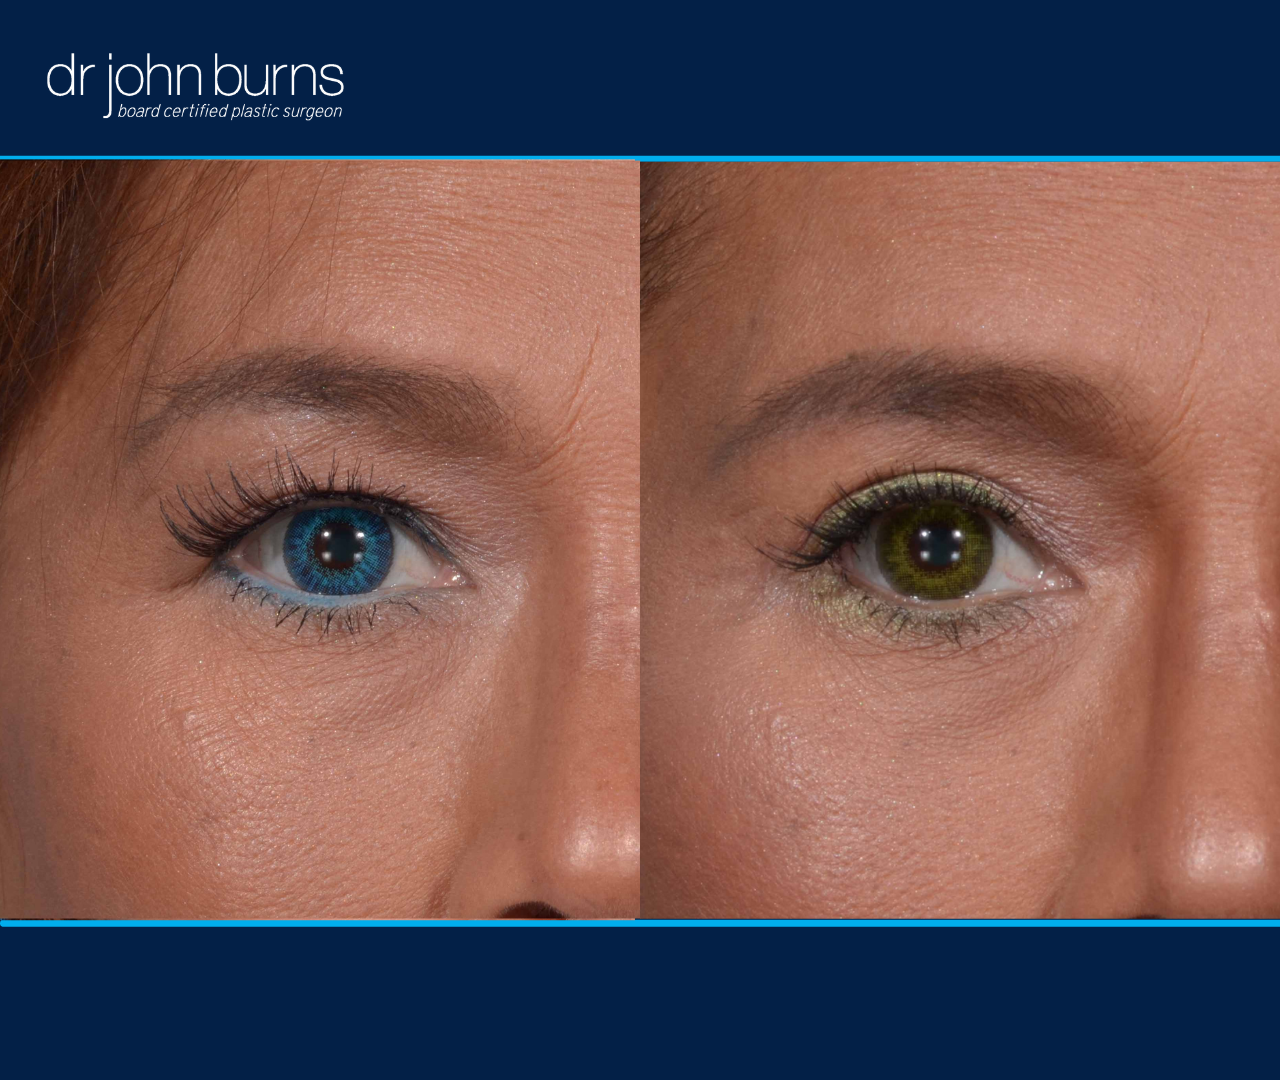 right eye view | before and after eyelid surgery results by Dr. John Burns